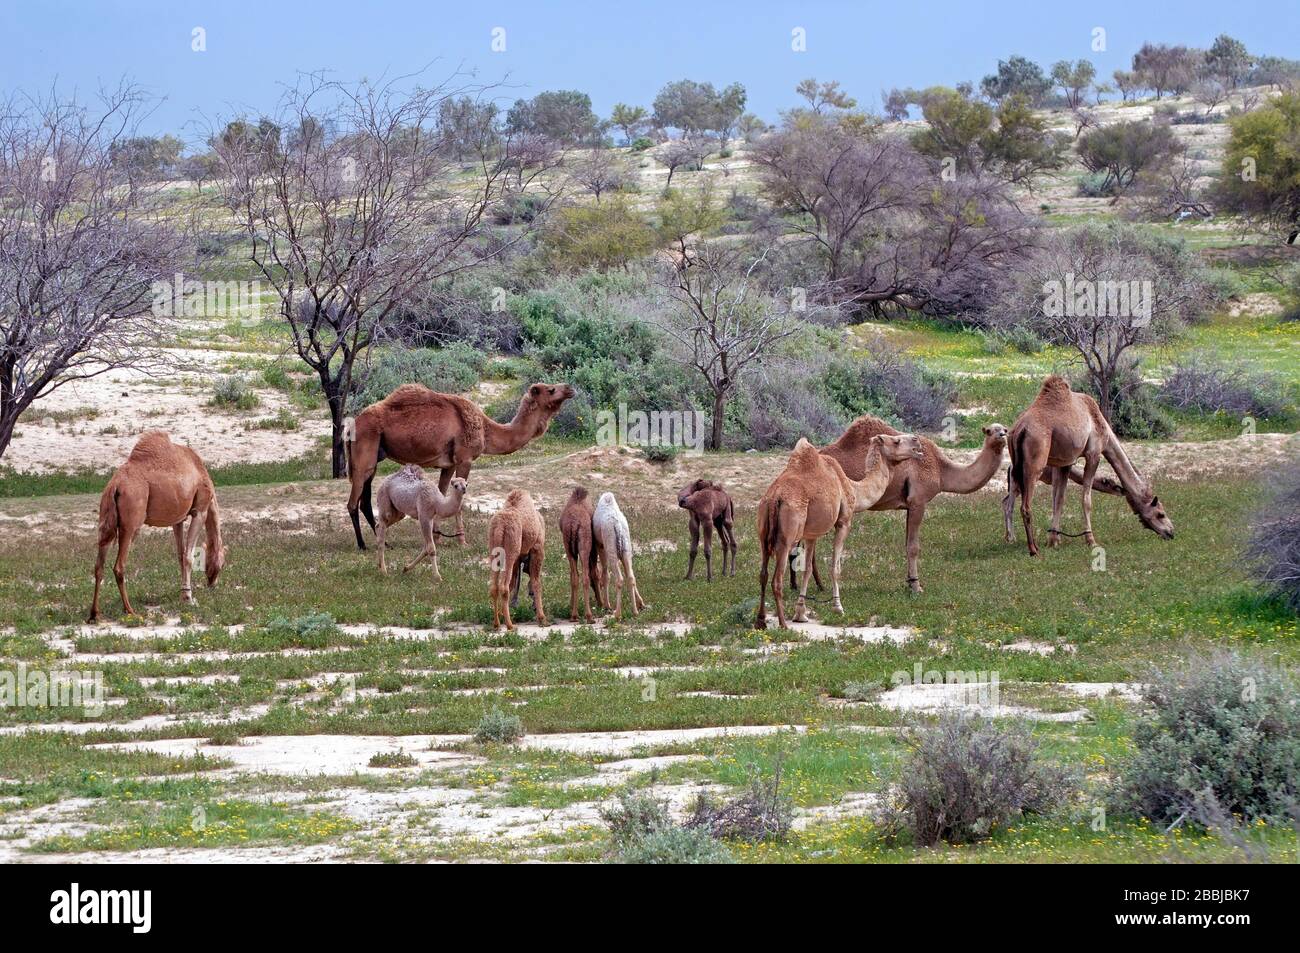 Camel herd in the Negev during spring time, Israel Stock Photo